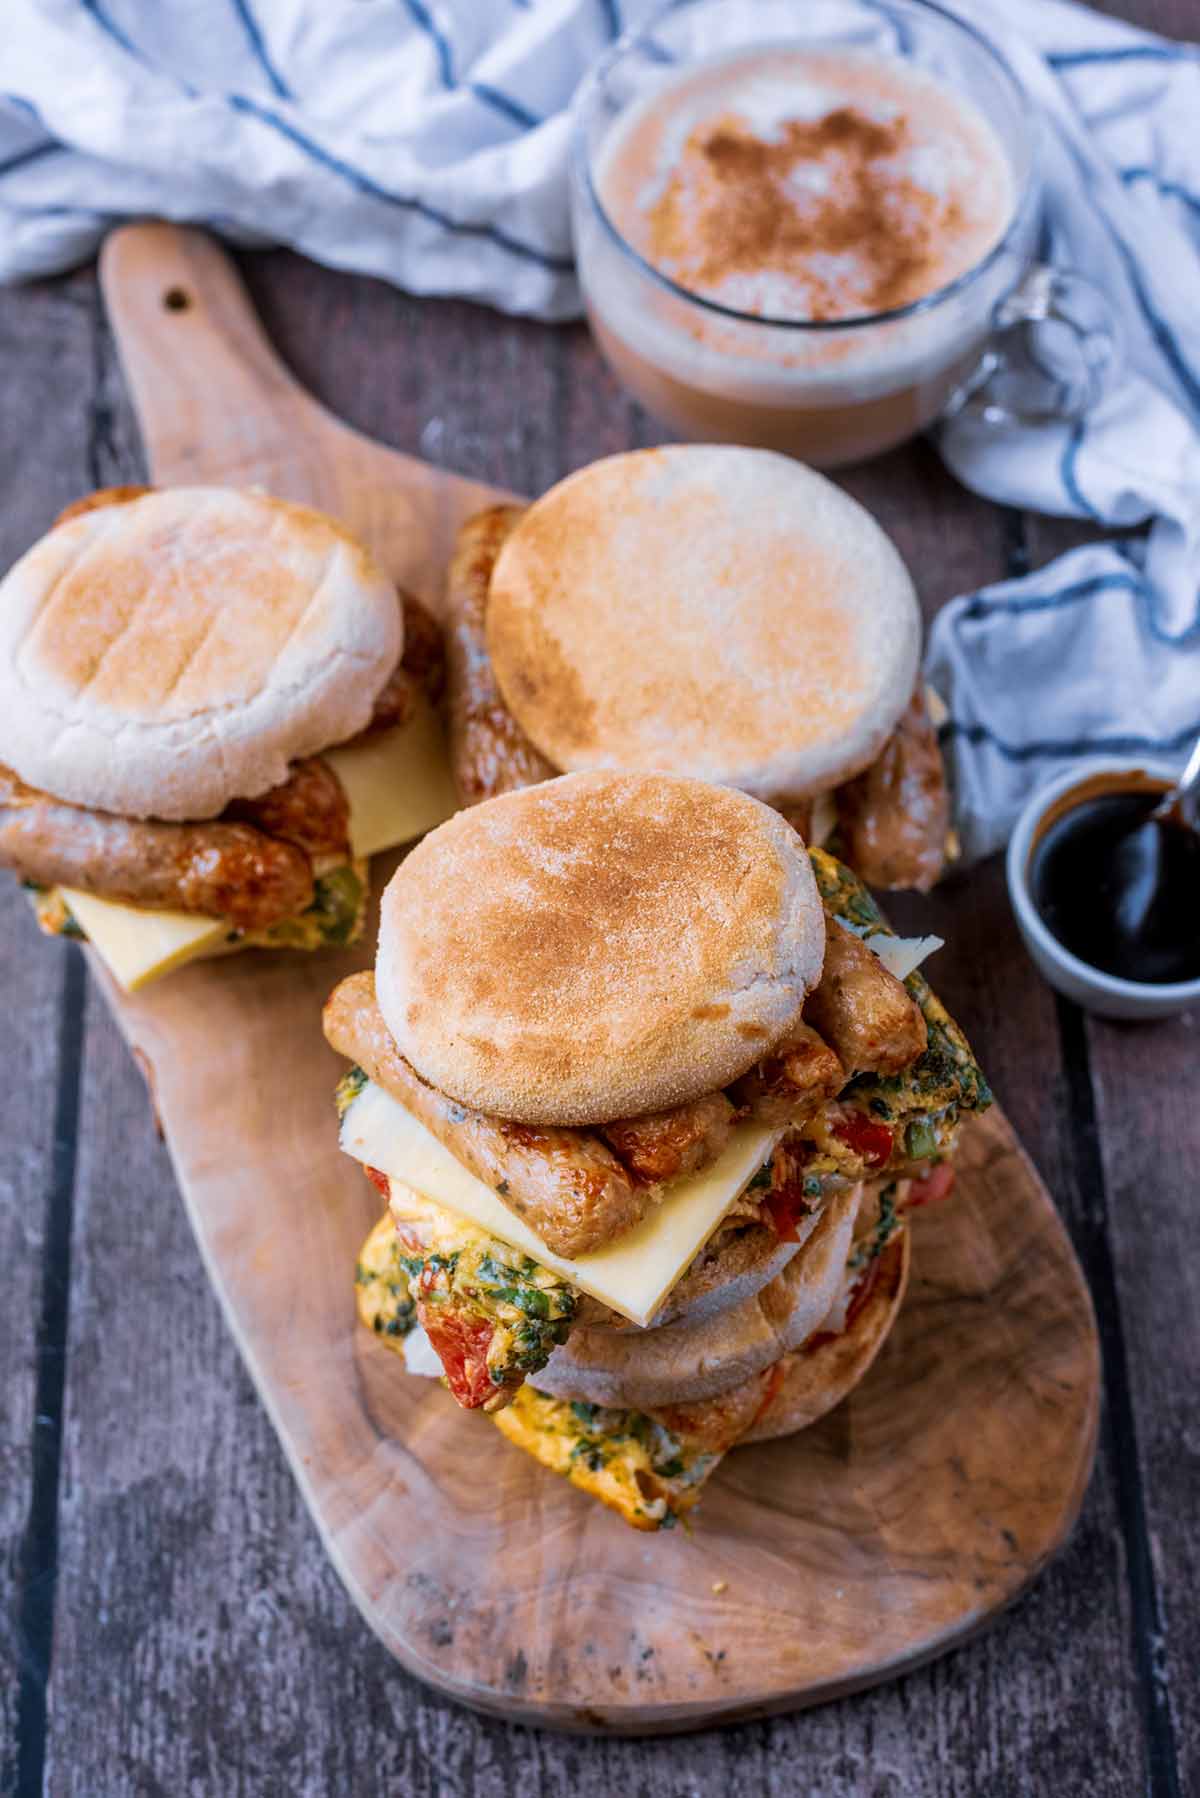 Four breakfast sandwiches on a wooden serving board next to a cup of coffee.